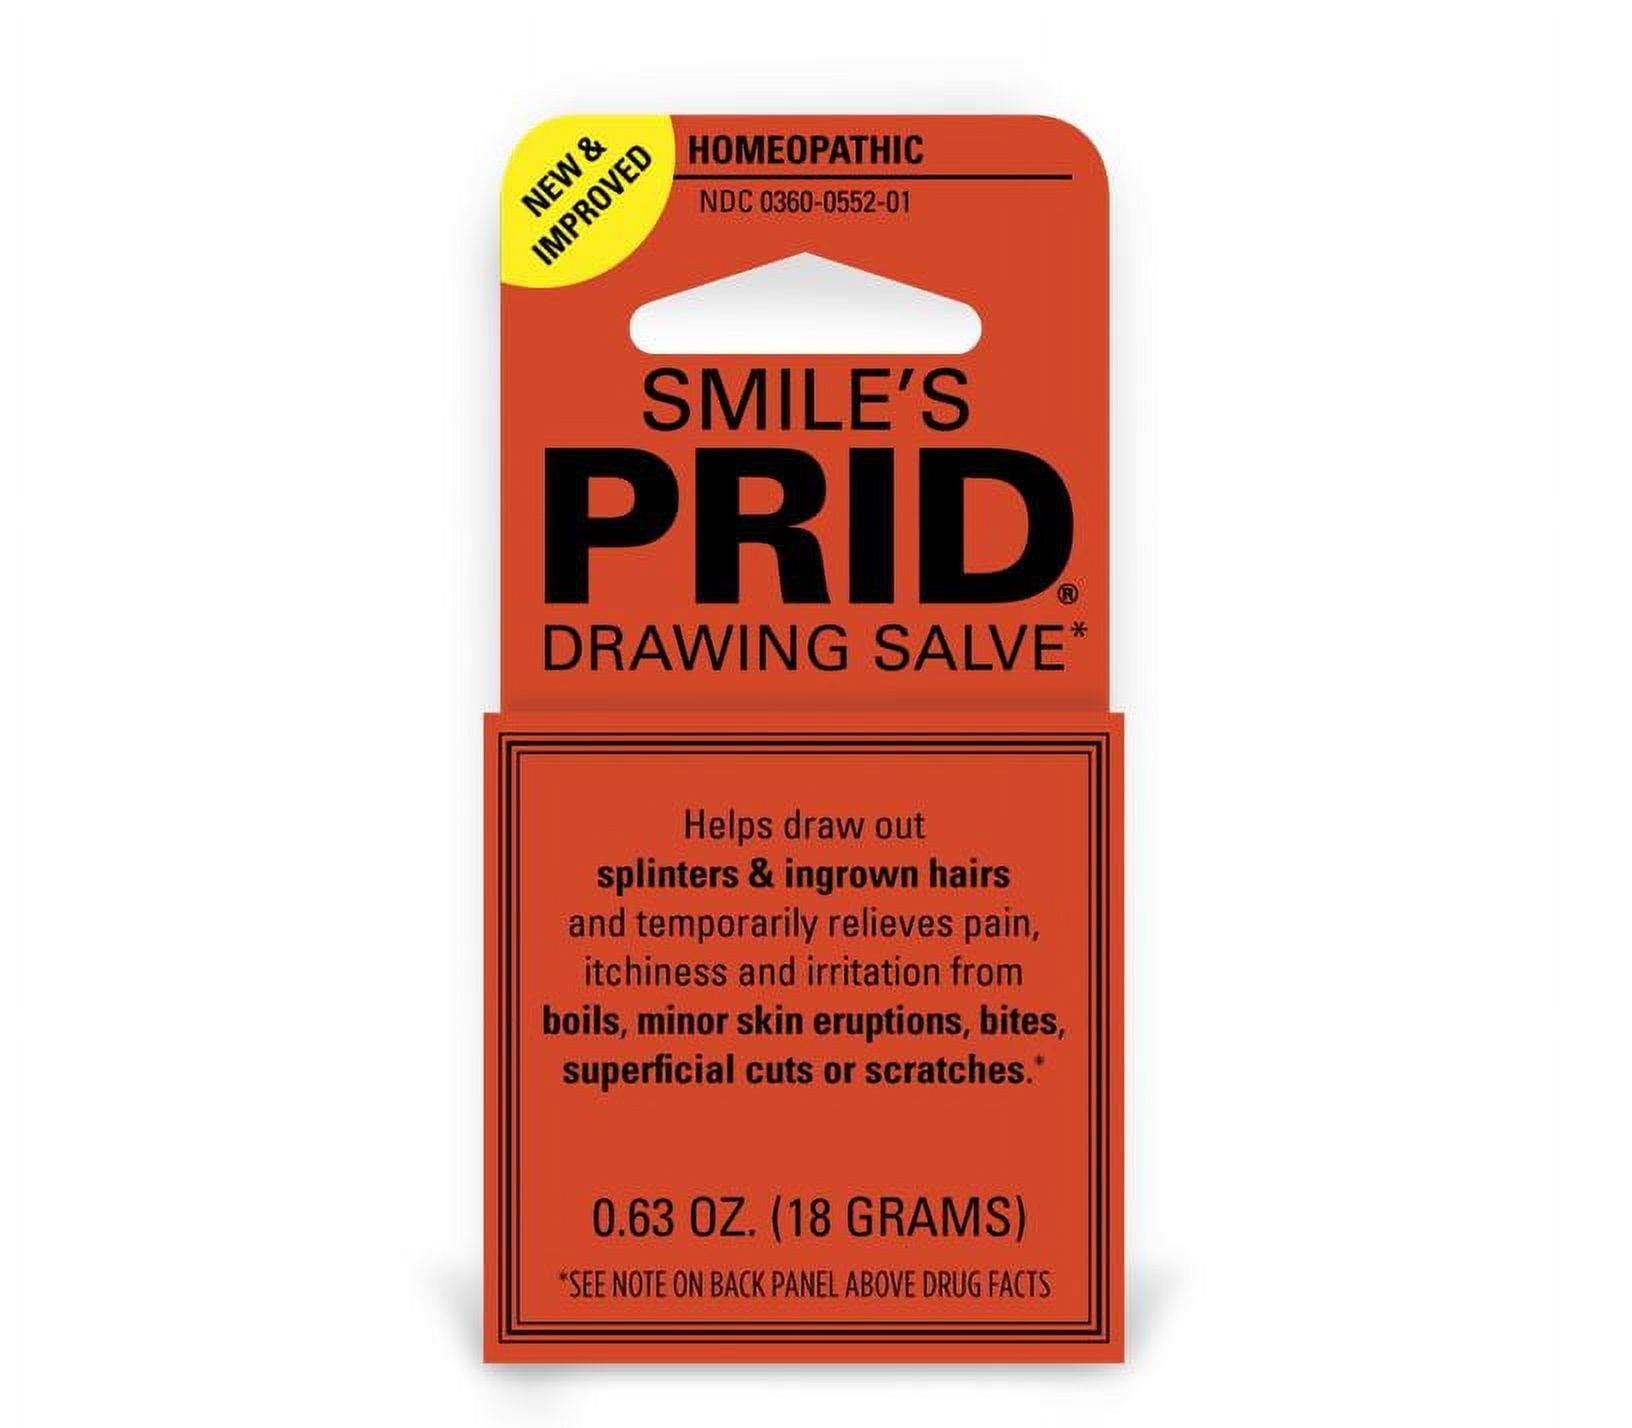 Smile's PRID Drawing Salve, Natural Homeopathic Relief of Topical